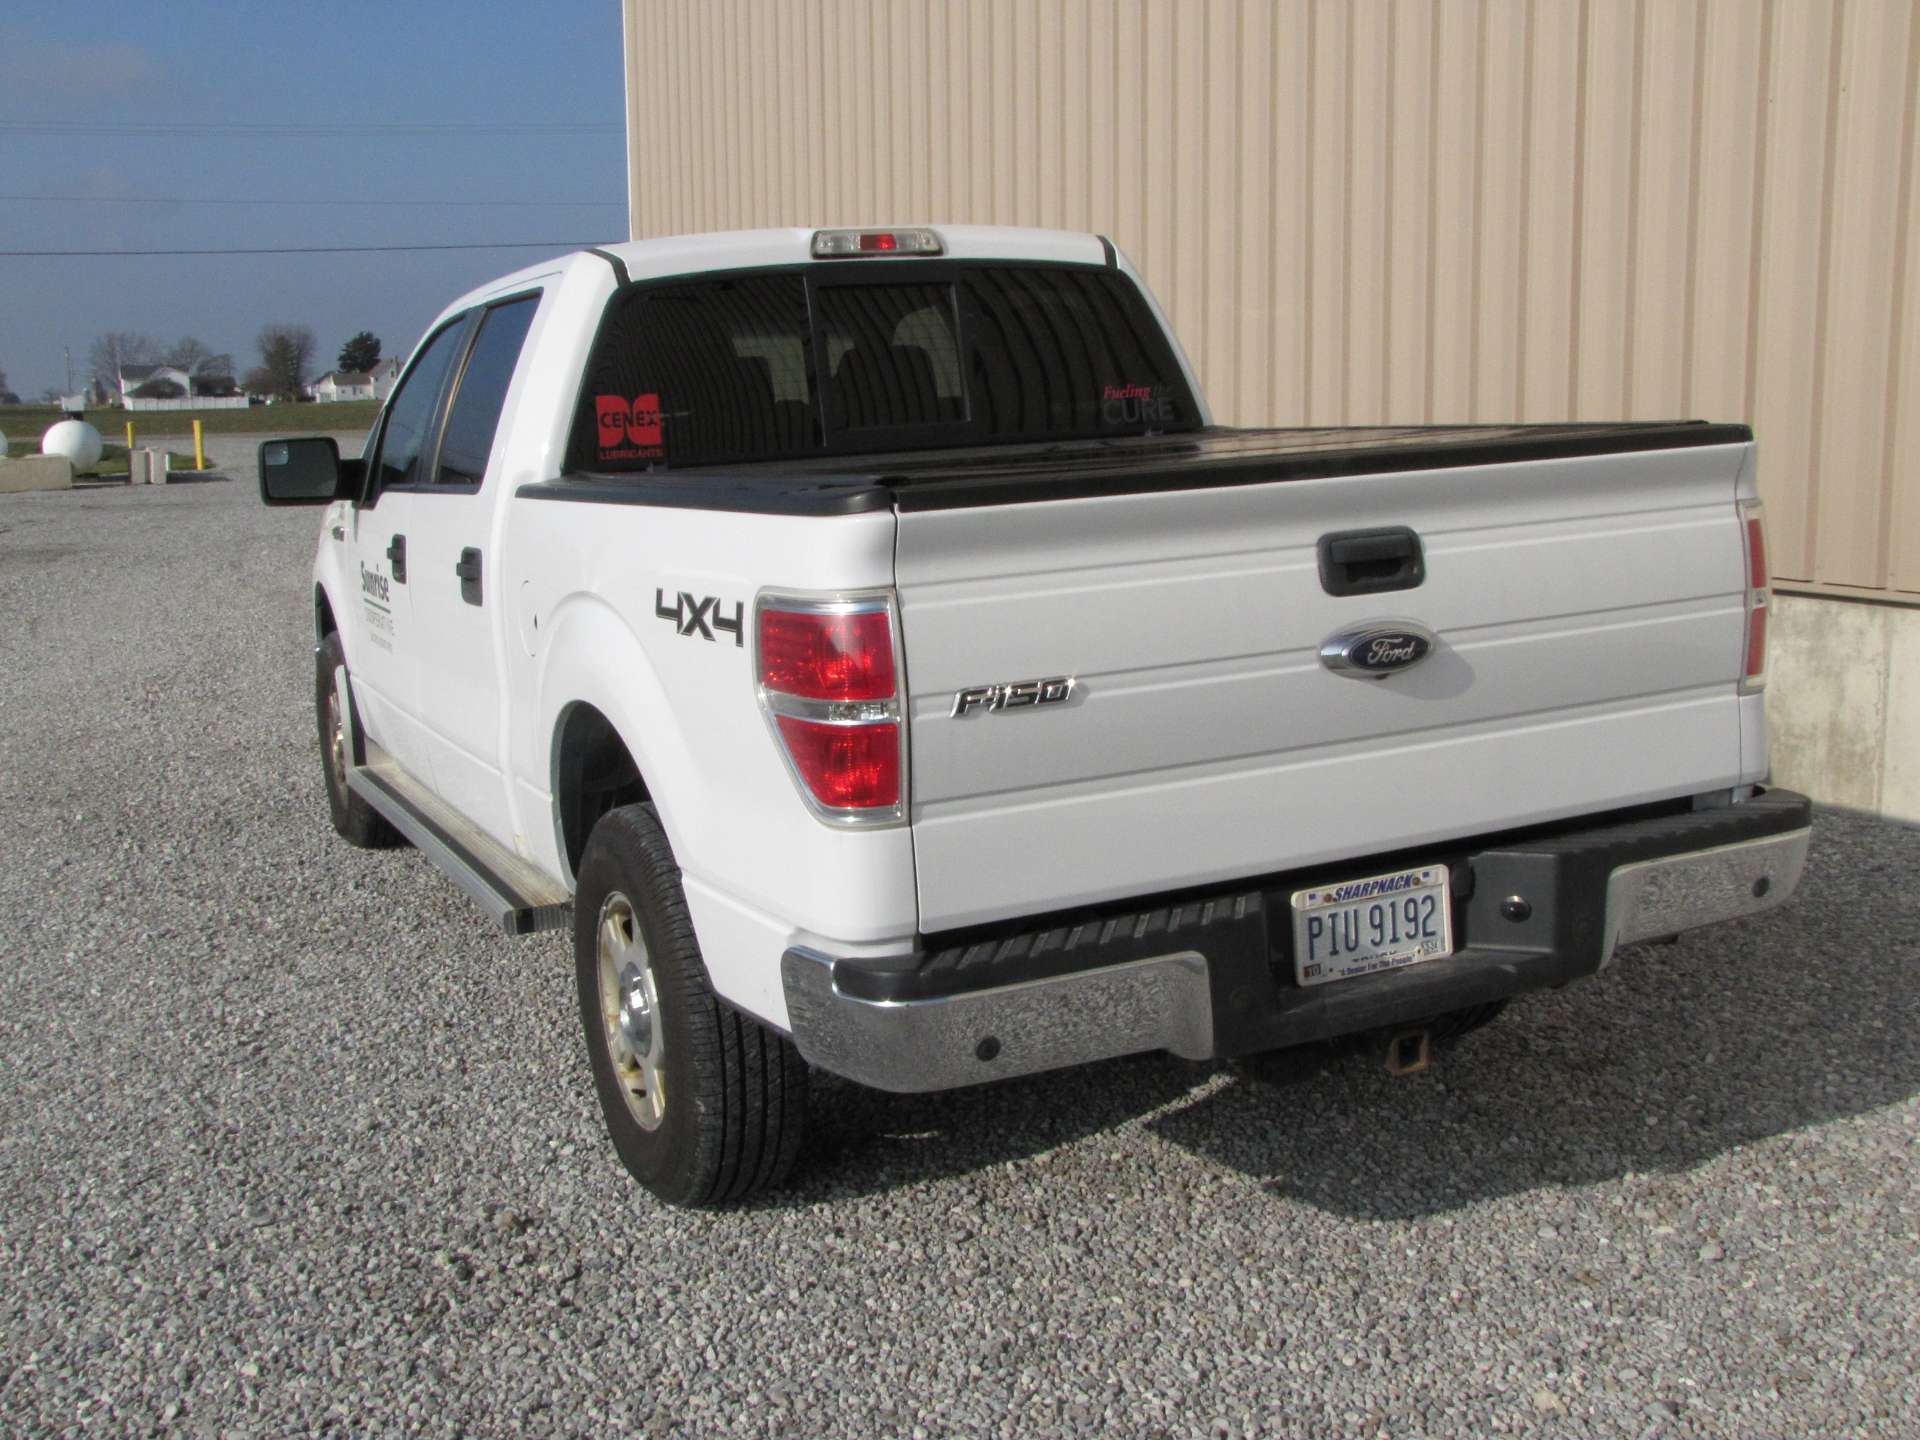 2014 Ford F-150 XLT pickup truck - Image 13 of 68